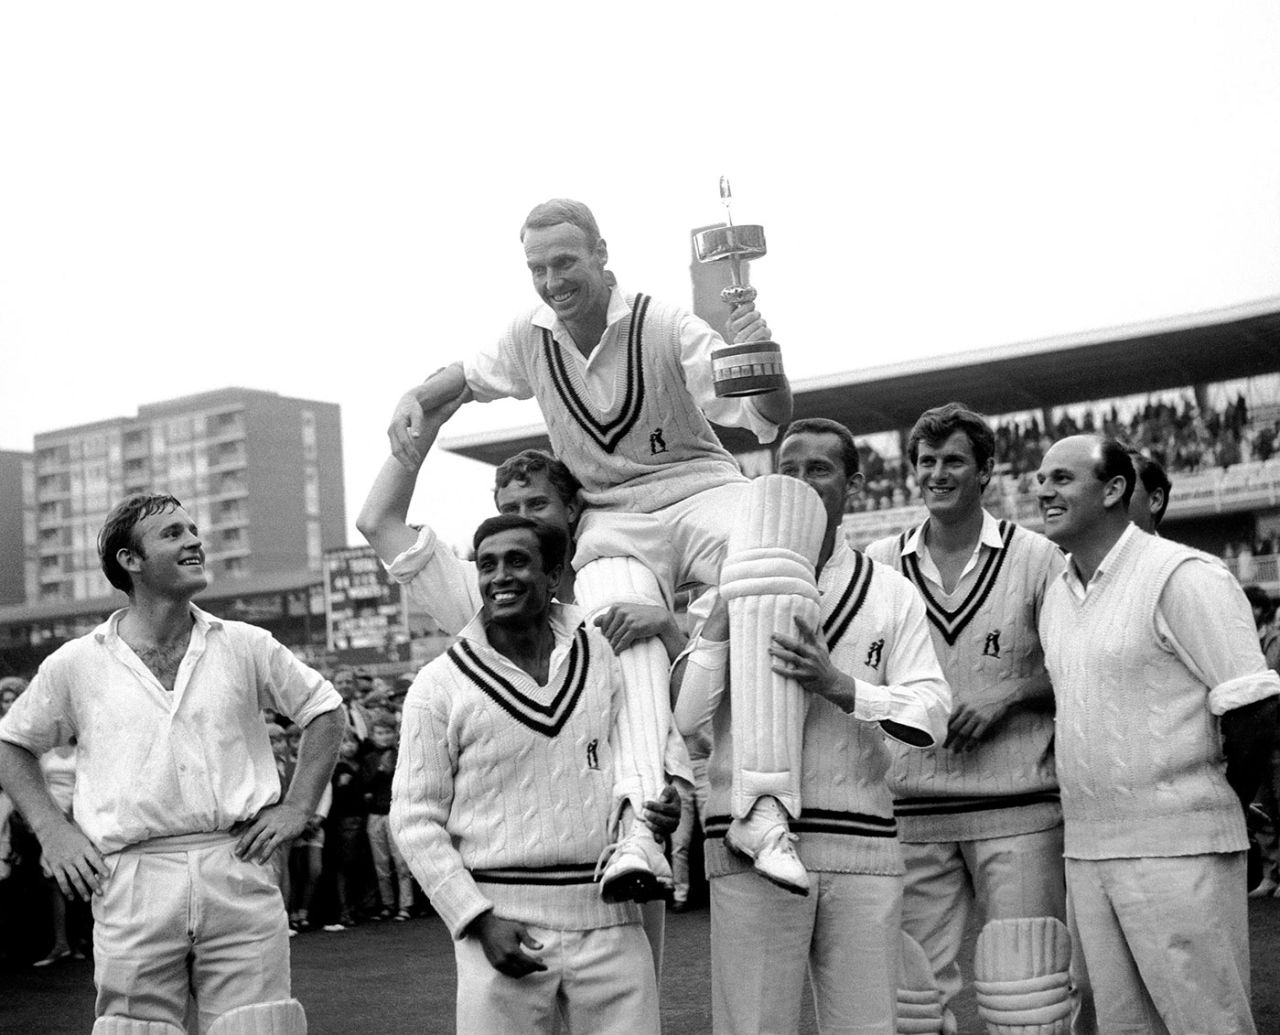 Warwickshire captain Alan Smith is chaired by his team-mates after their title win, Sussex v Warwickshire, Gillette Cup final, Lord's, September 7, 1968